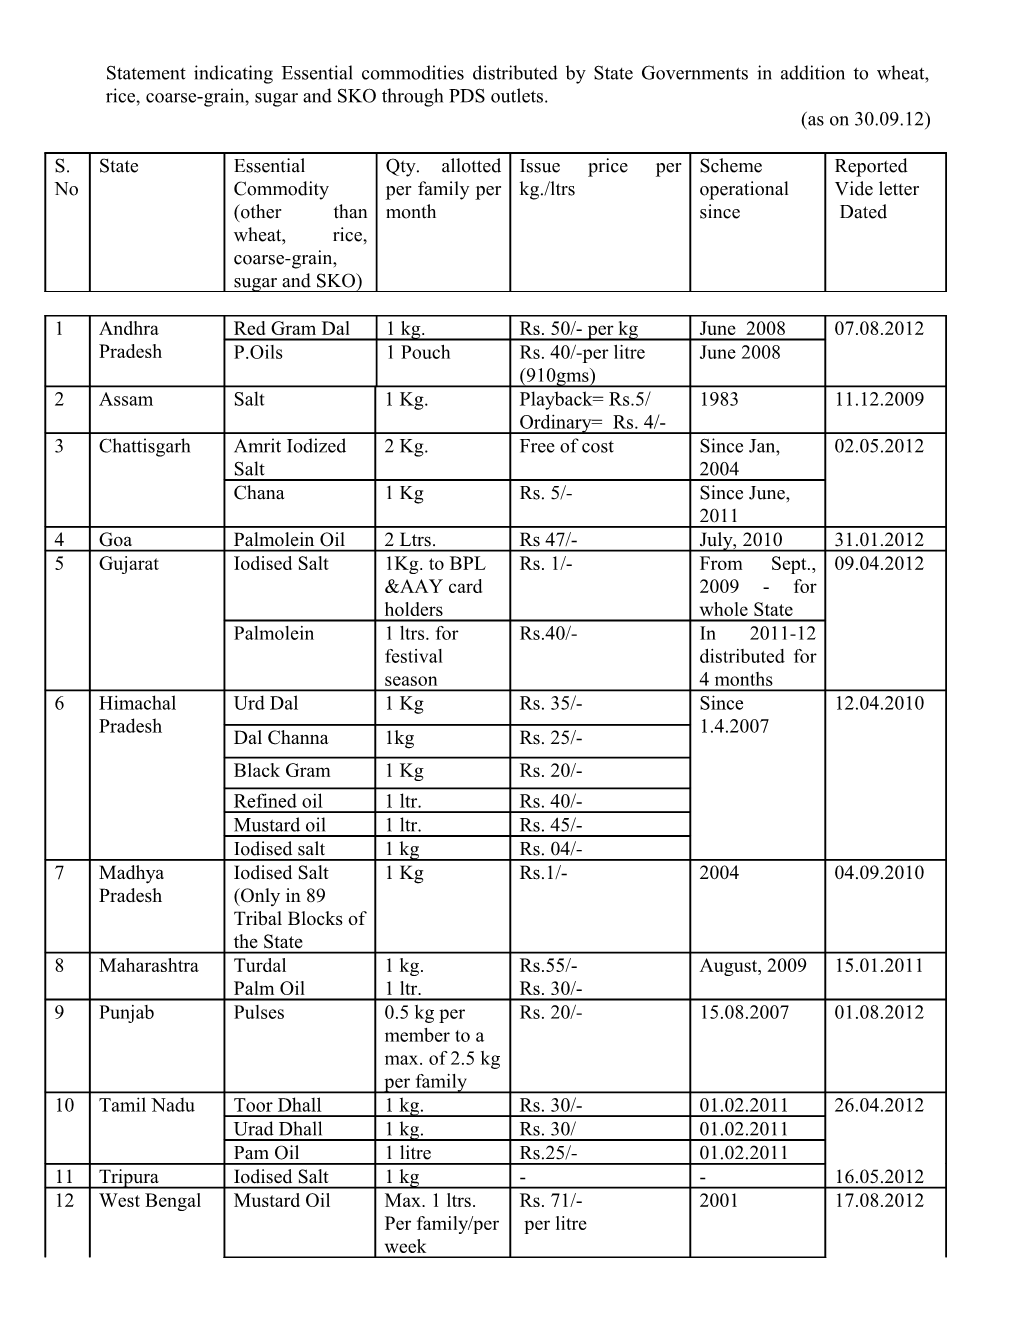 Statement Indicating Essential Commodities Distributed by State Governments in Addition s1